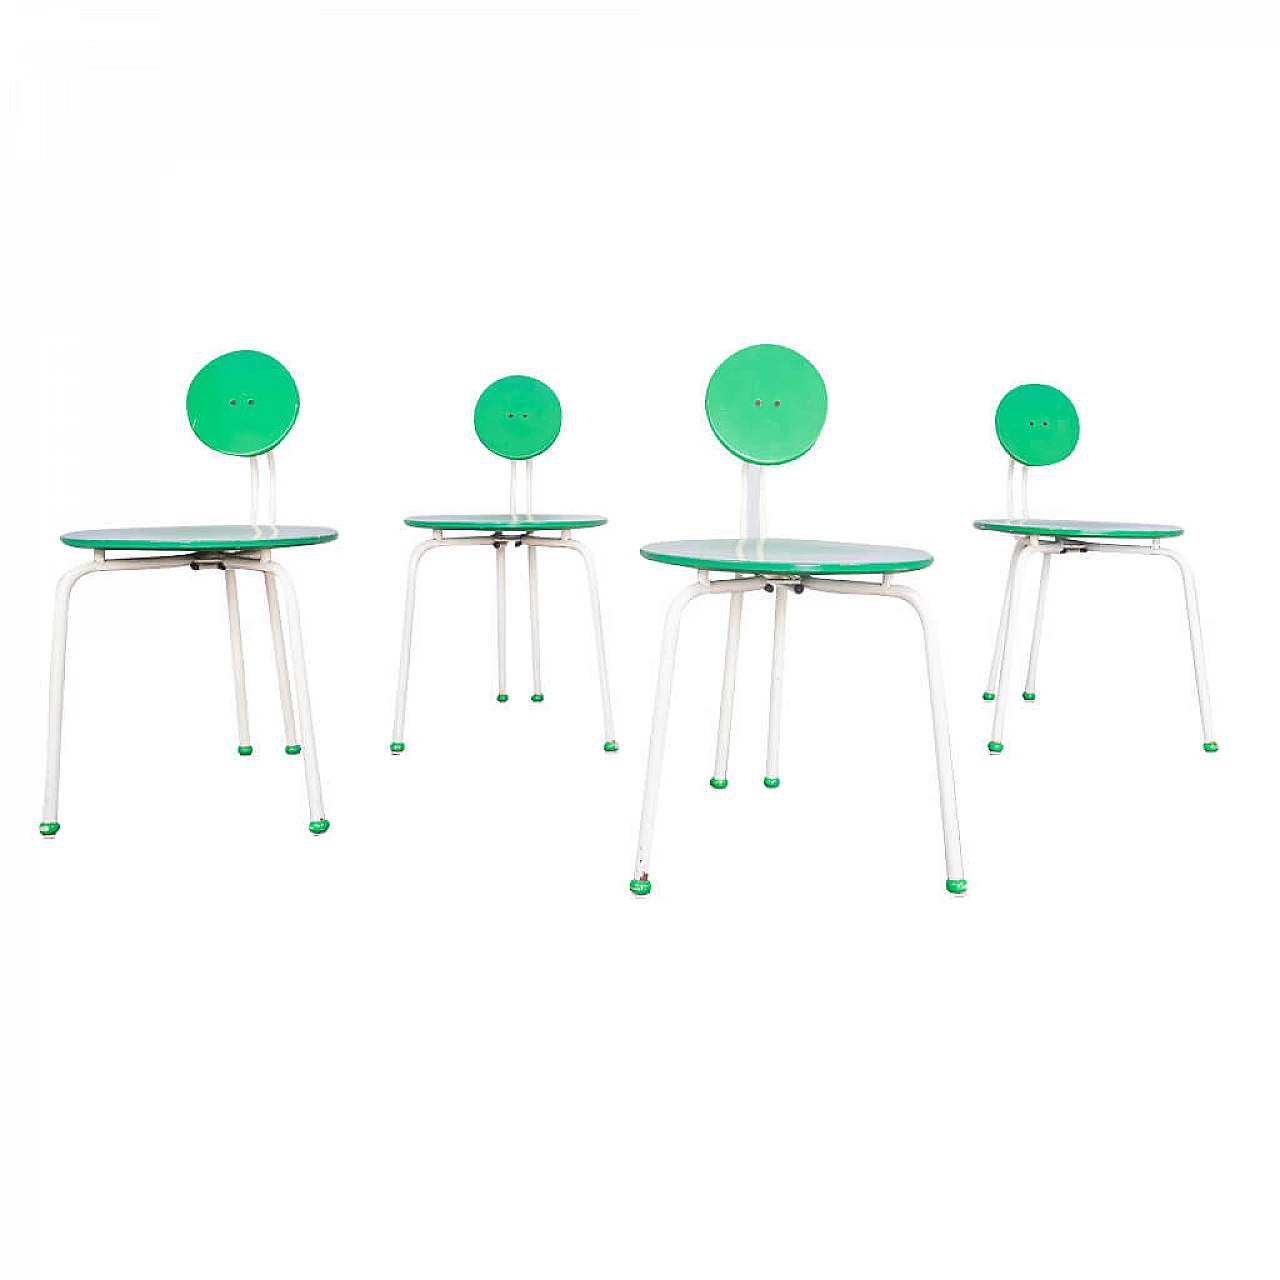 4 Green wooden chairs Memphis style, 70s 1228875